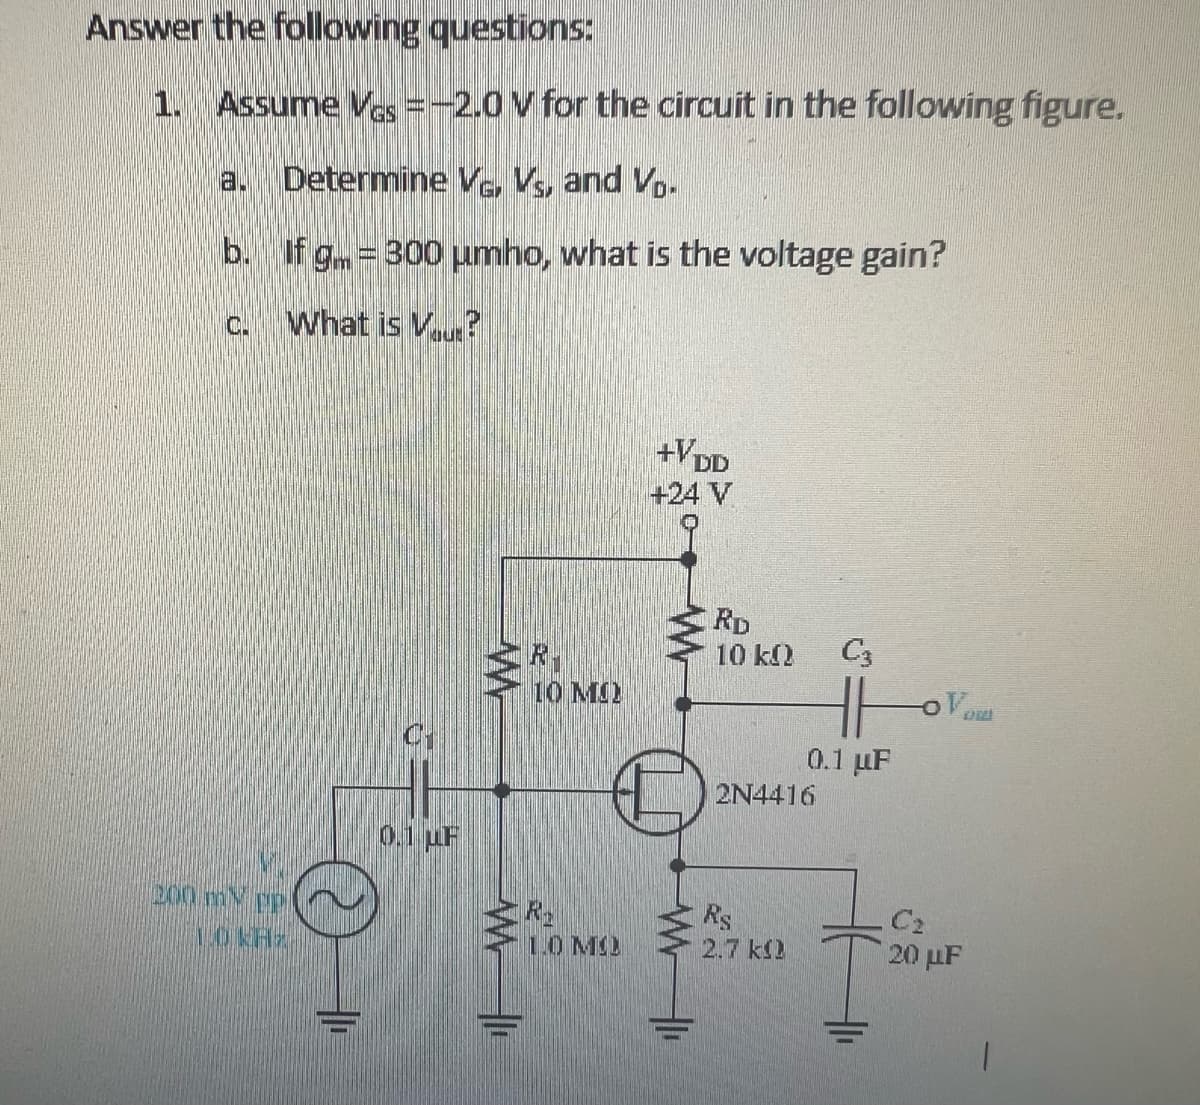 Answer the following questions:
1. Assume Ves = -2.0 V for the circuit in the following figure.
Determine V, VS, and V.
b.
If g = 300 μmho, what is the voltage gain?
c.
What is V...?
a.
200 my pp
1.0 KHz
C1
0.1 uF
OF
10 MU
1.0 MO
+VDD
+24 V
1₁
RD
10 kQ
2N4416
Rs
2.7 k
C3
Hor
0.1 µF
and
C₂
20 μF